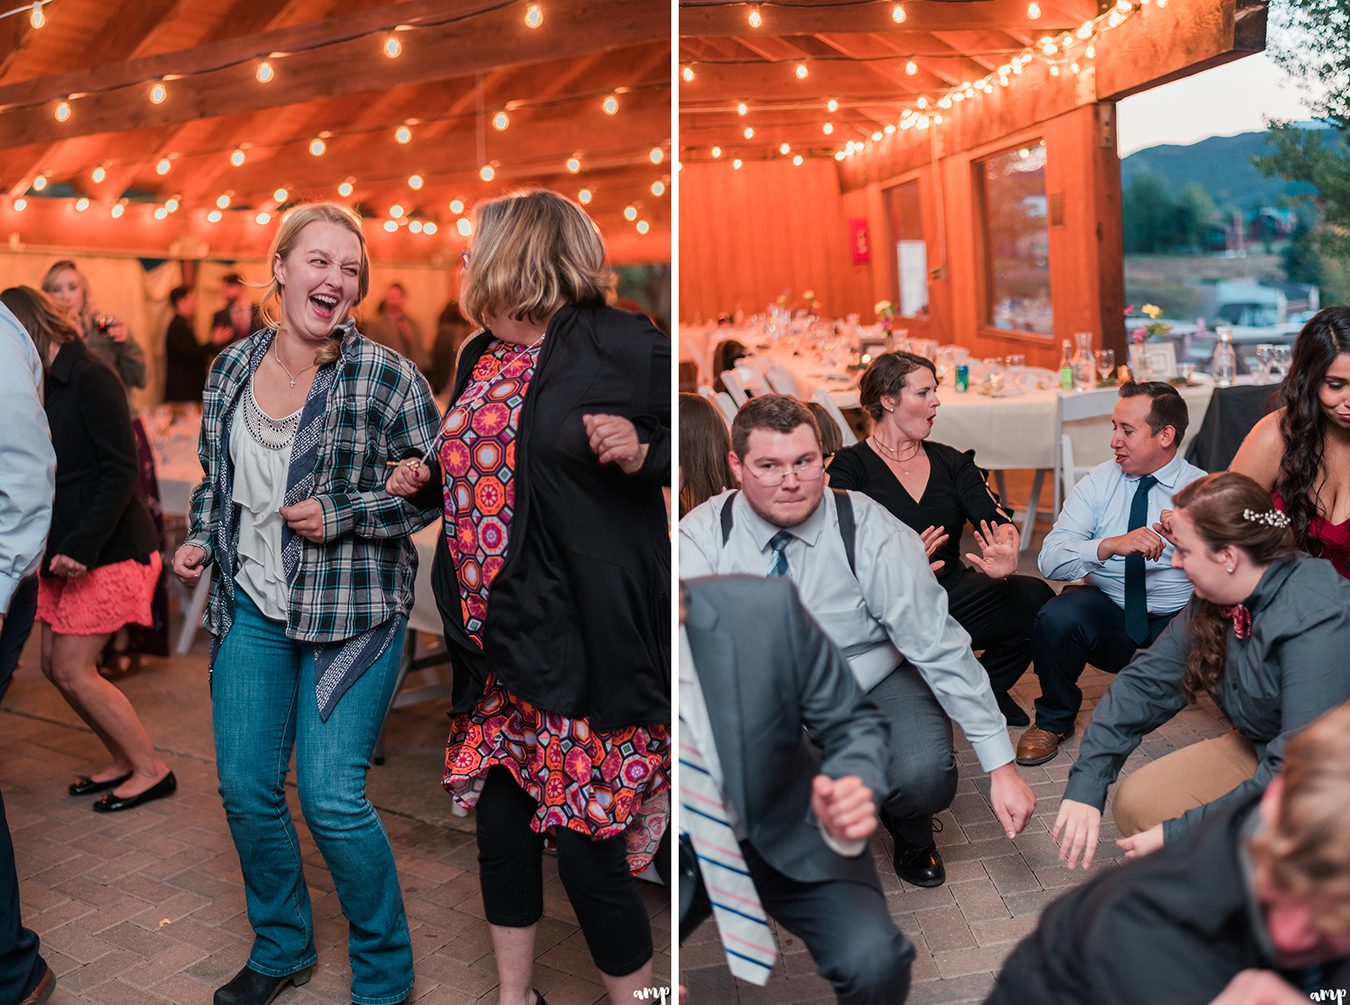 Wedding reception at the mountain wedding garden in crested butte